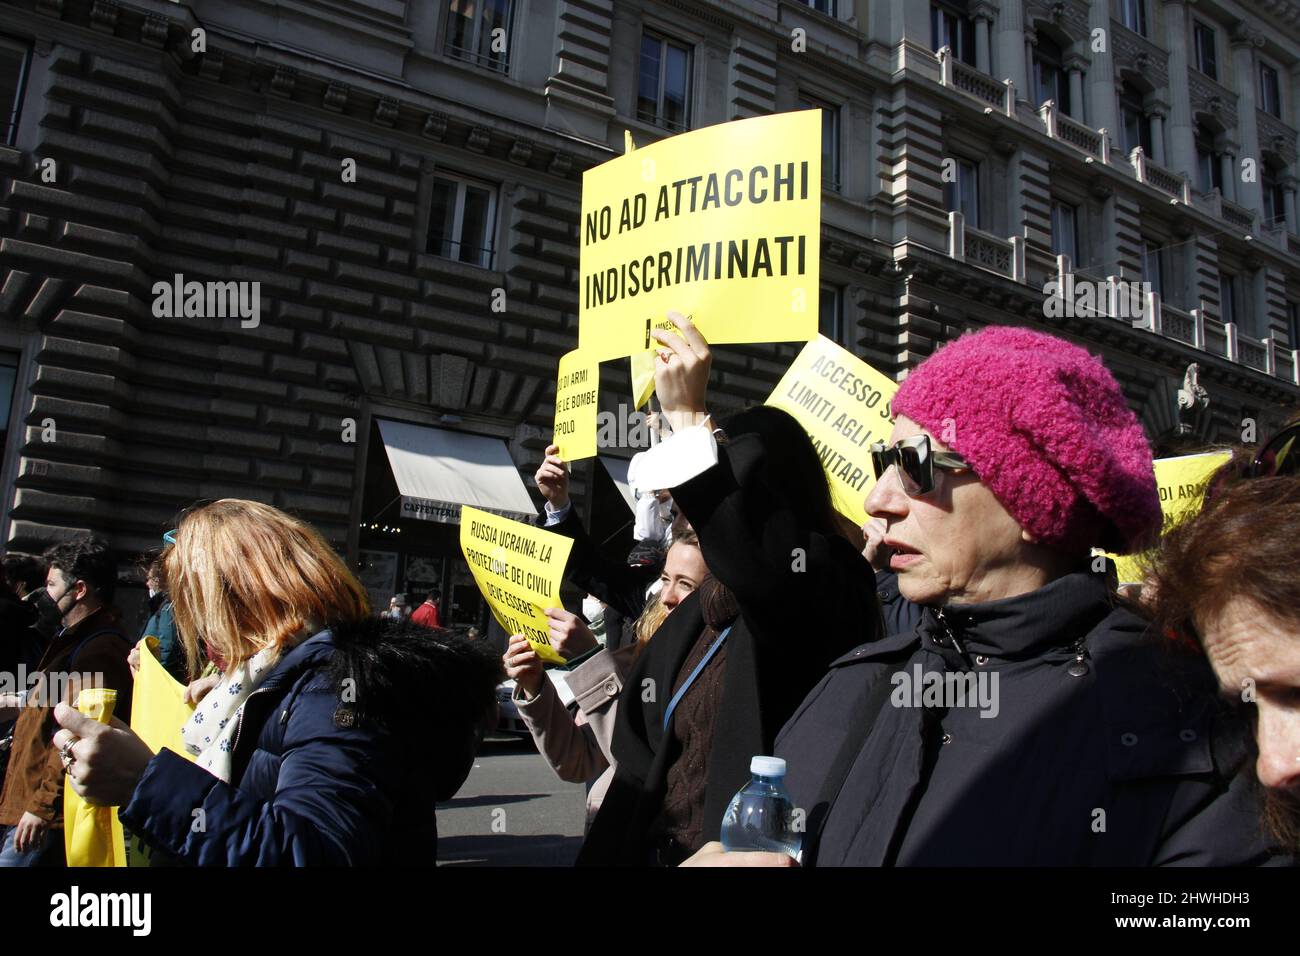 5th March 2022 Anti War protest- People in Rome Italy demonstrate against the war in Ukraine. Stock Photo